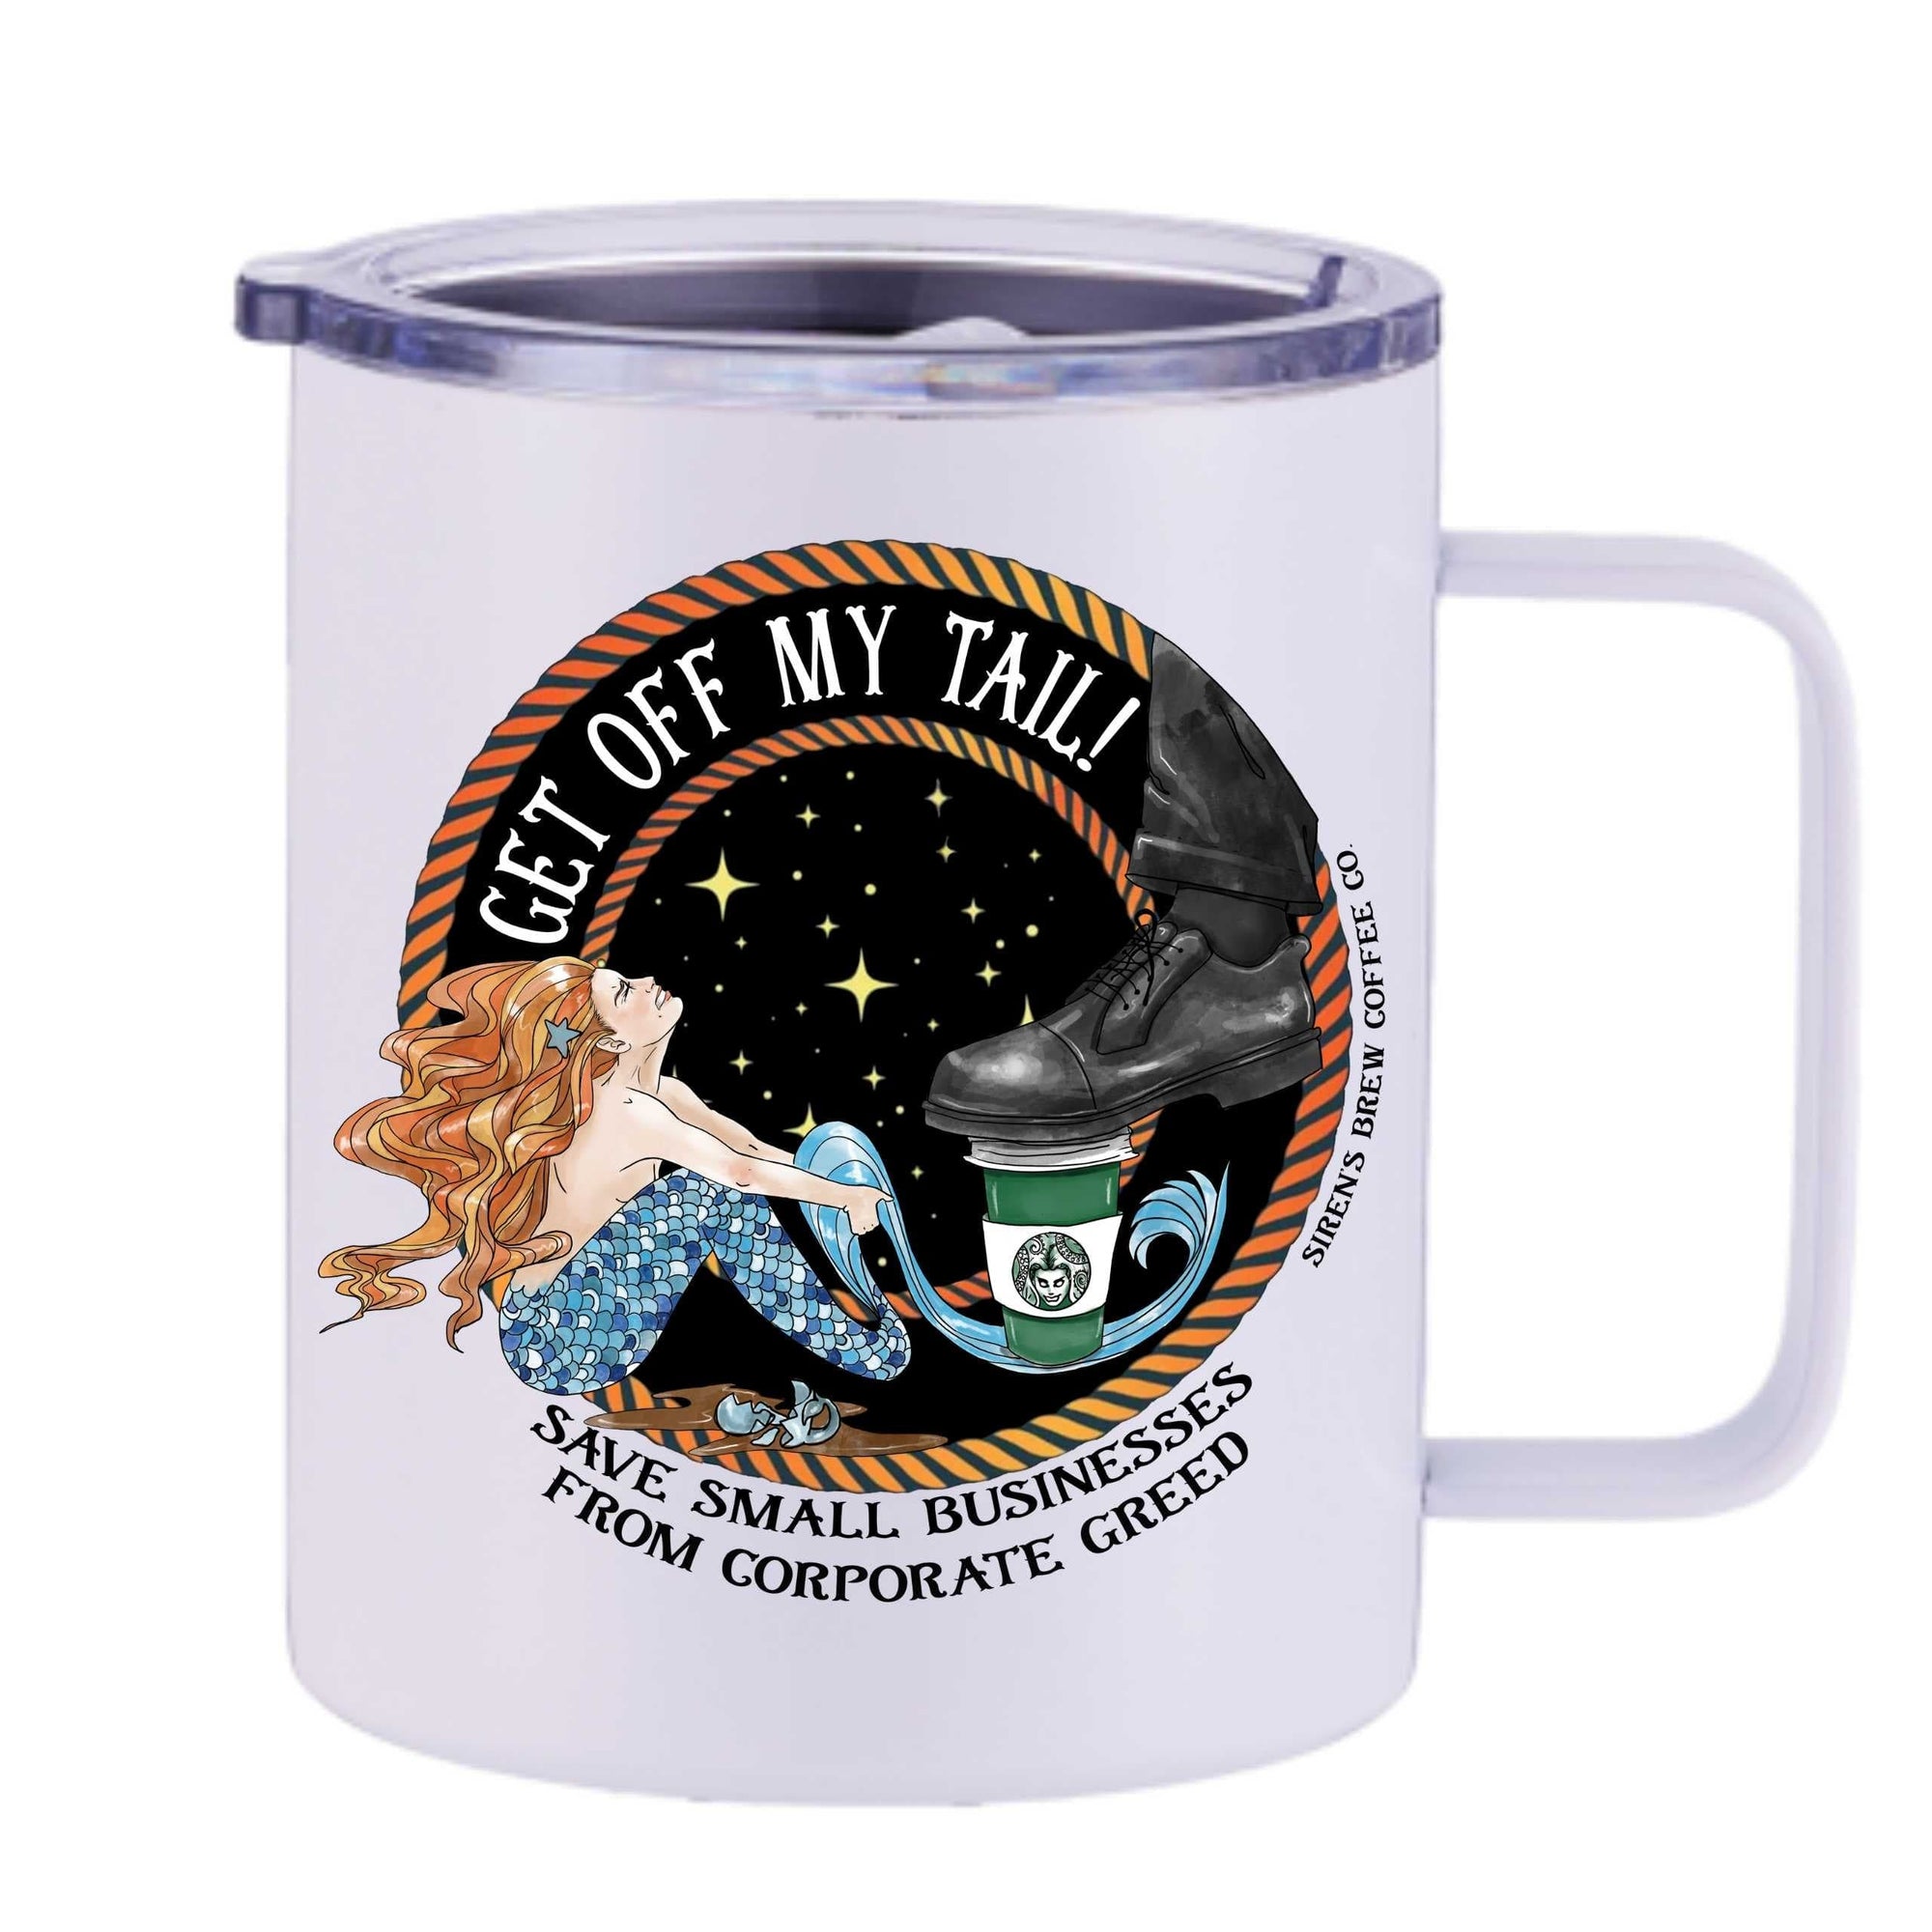 Get Off My Tail Insulated Travel Mug - Mountains & Mermaids